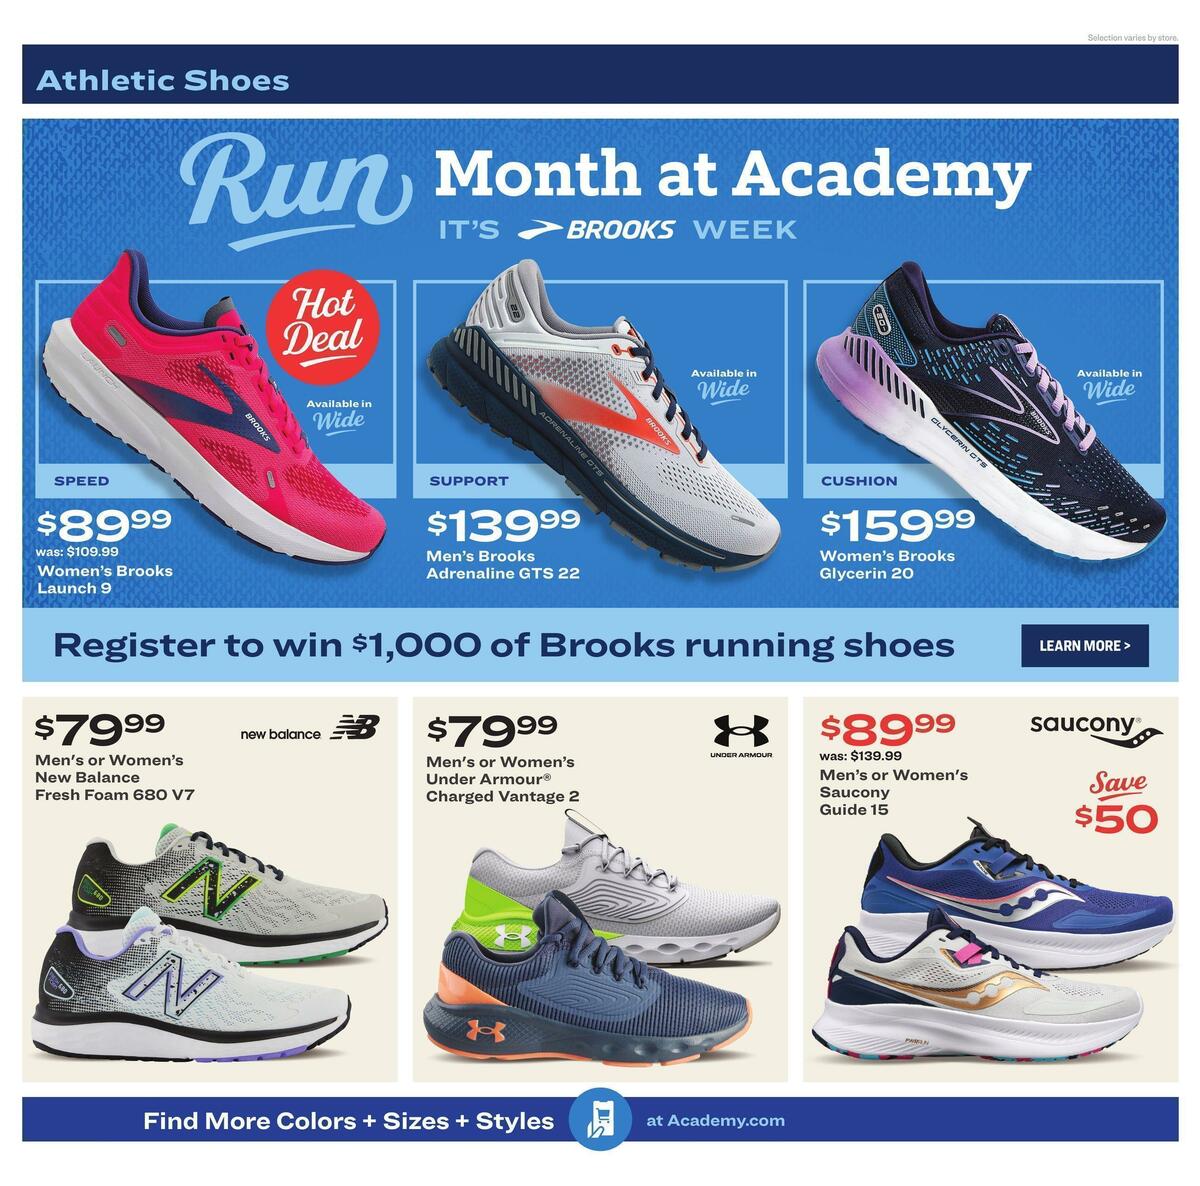 Academy Sports + Outdoors Weekly Ad from February 27